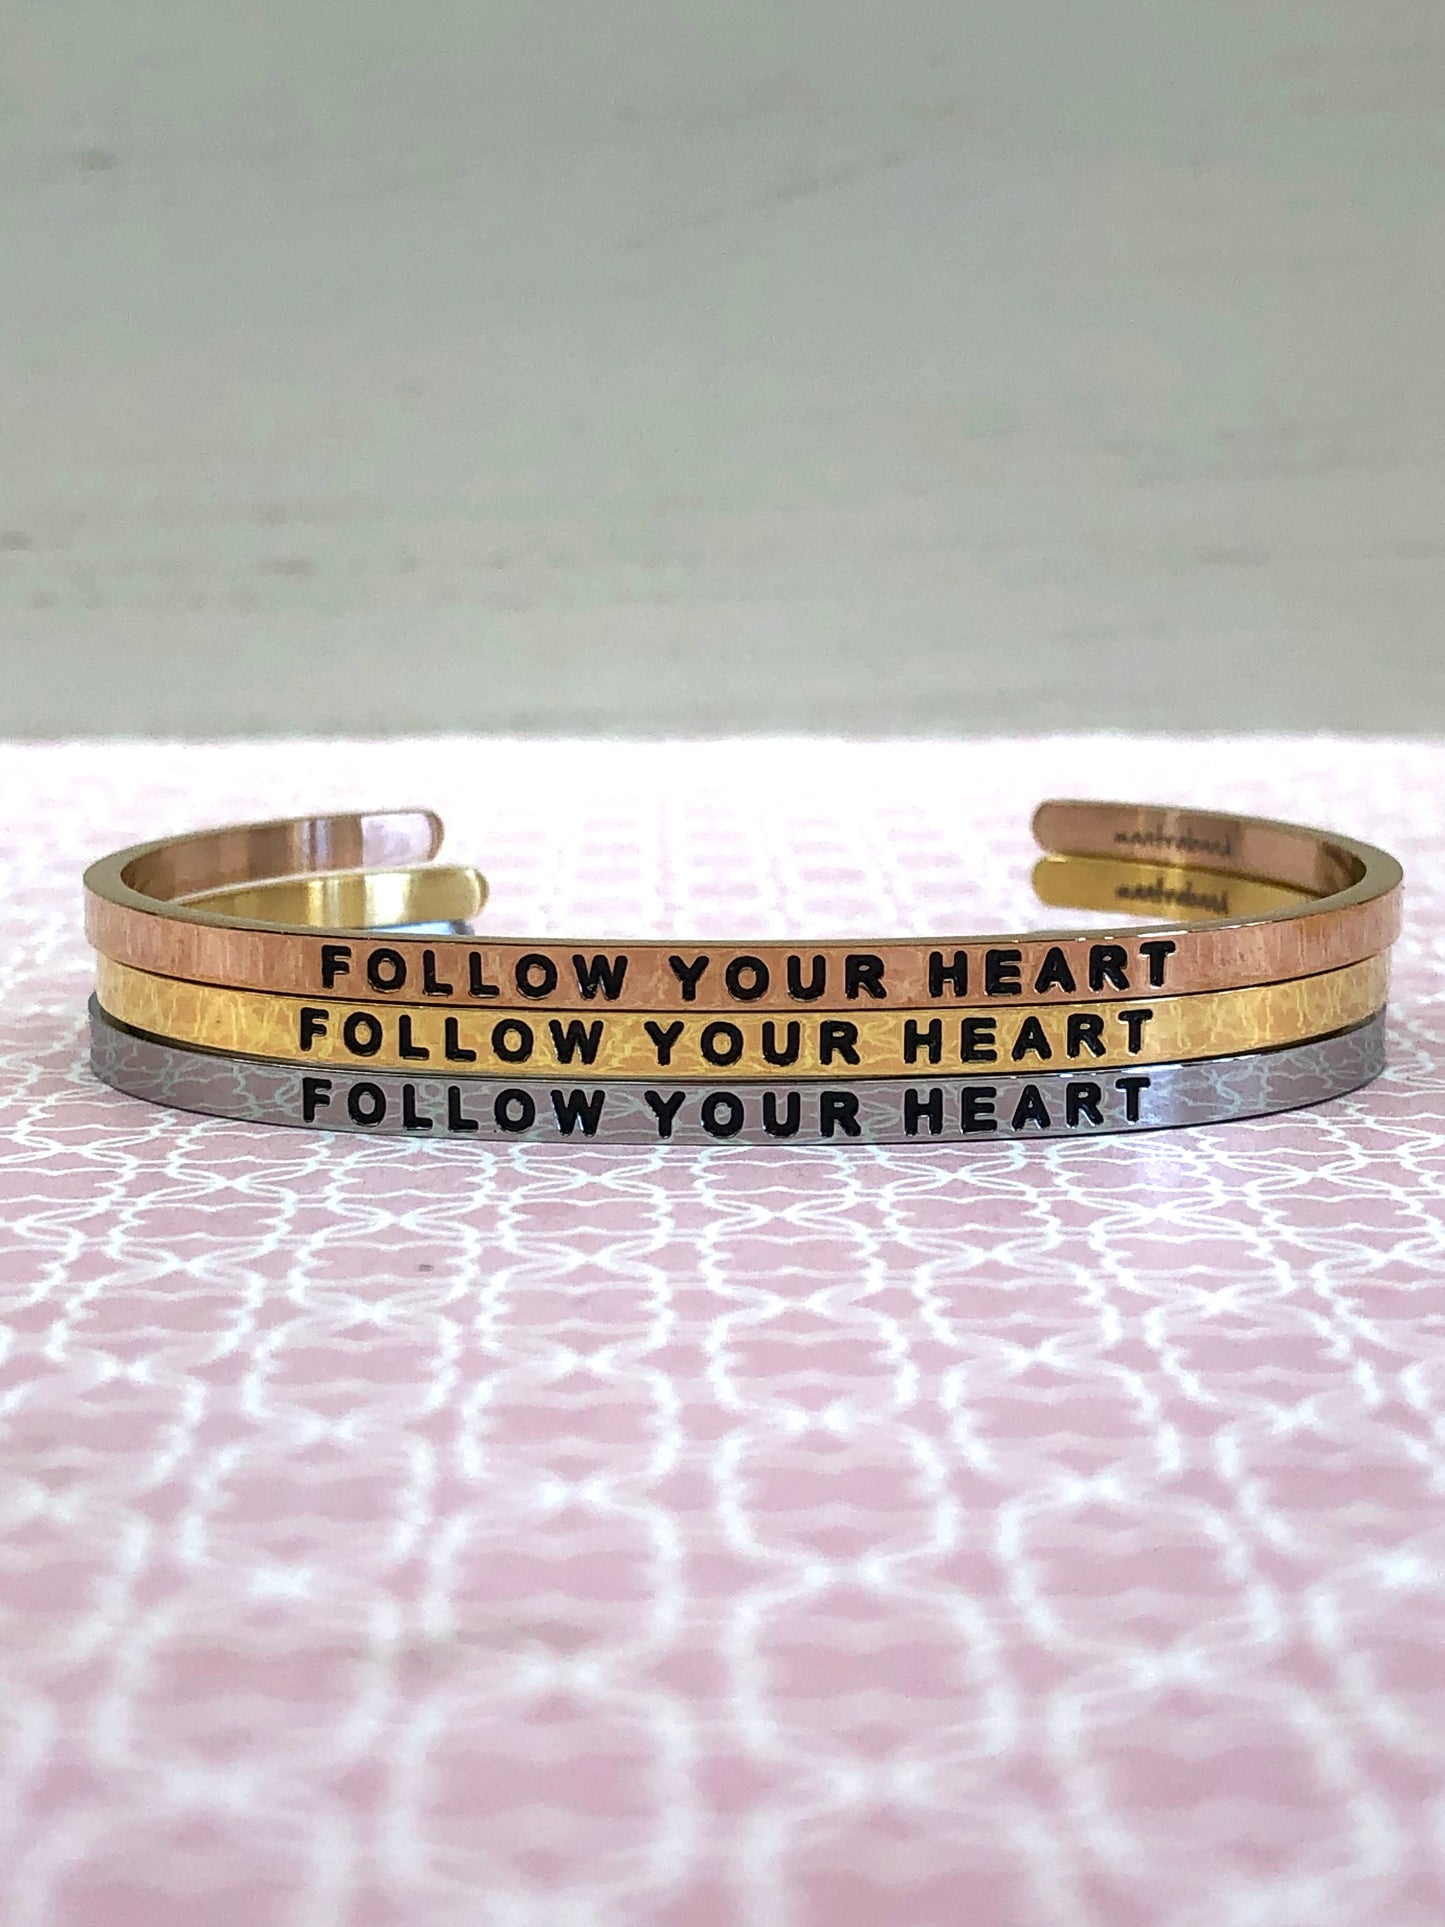 Follow Your Heart MantraBand - Jewelry - SierraLily